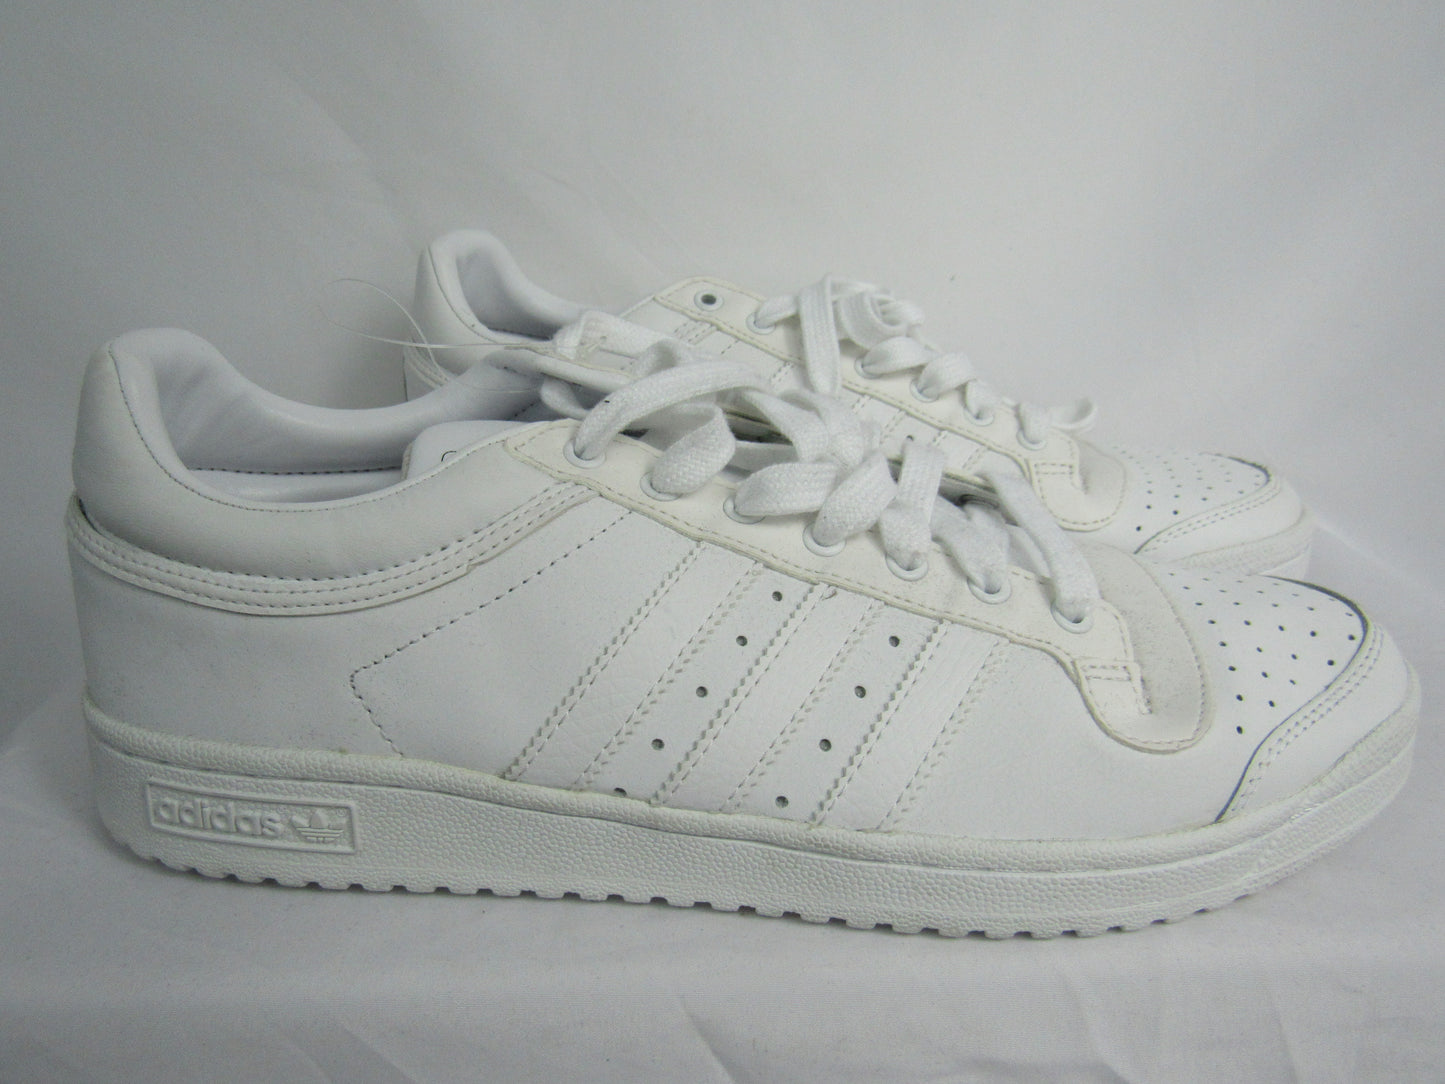 ADIDAS Top Tier Low Top - Size 11